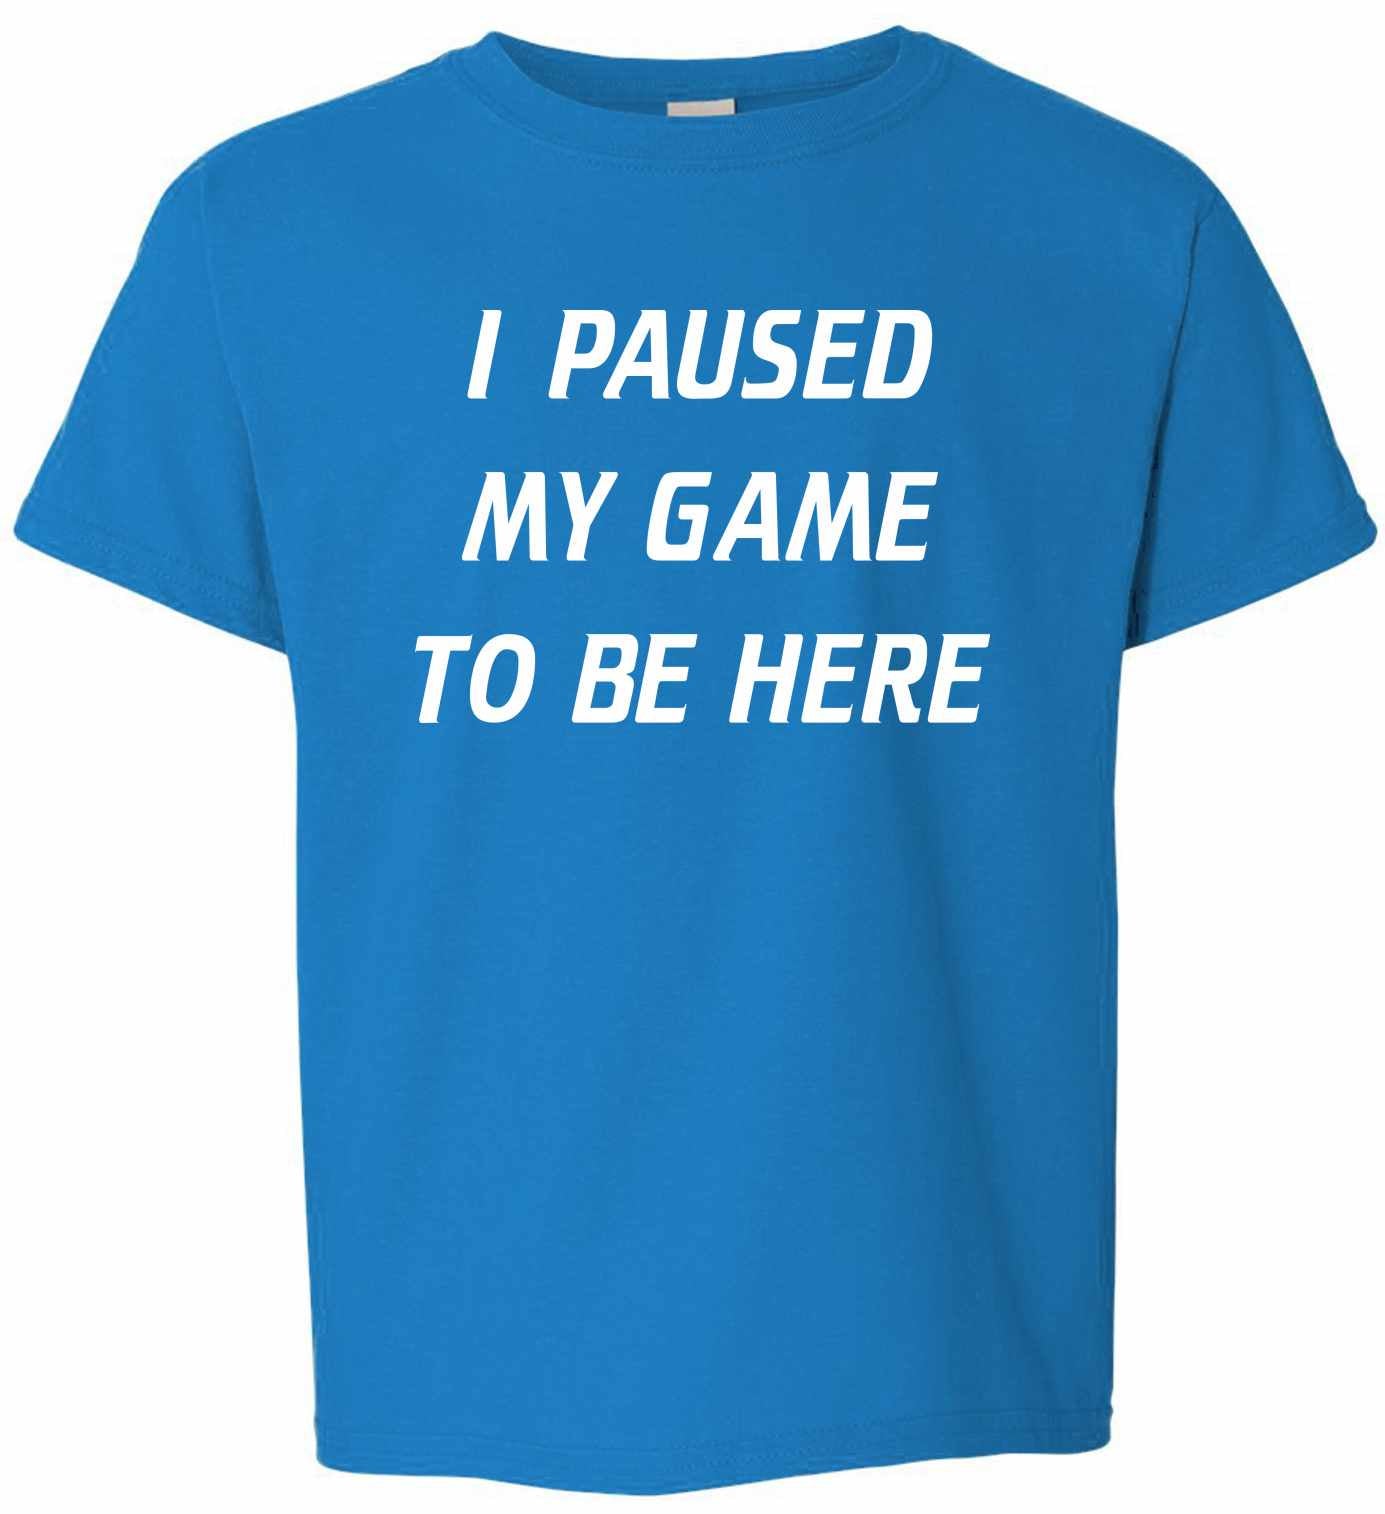 I Paused My Game to Be Here on Kids T-Shirt